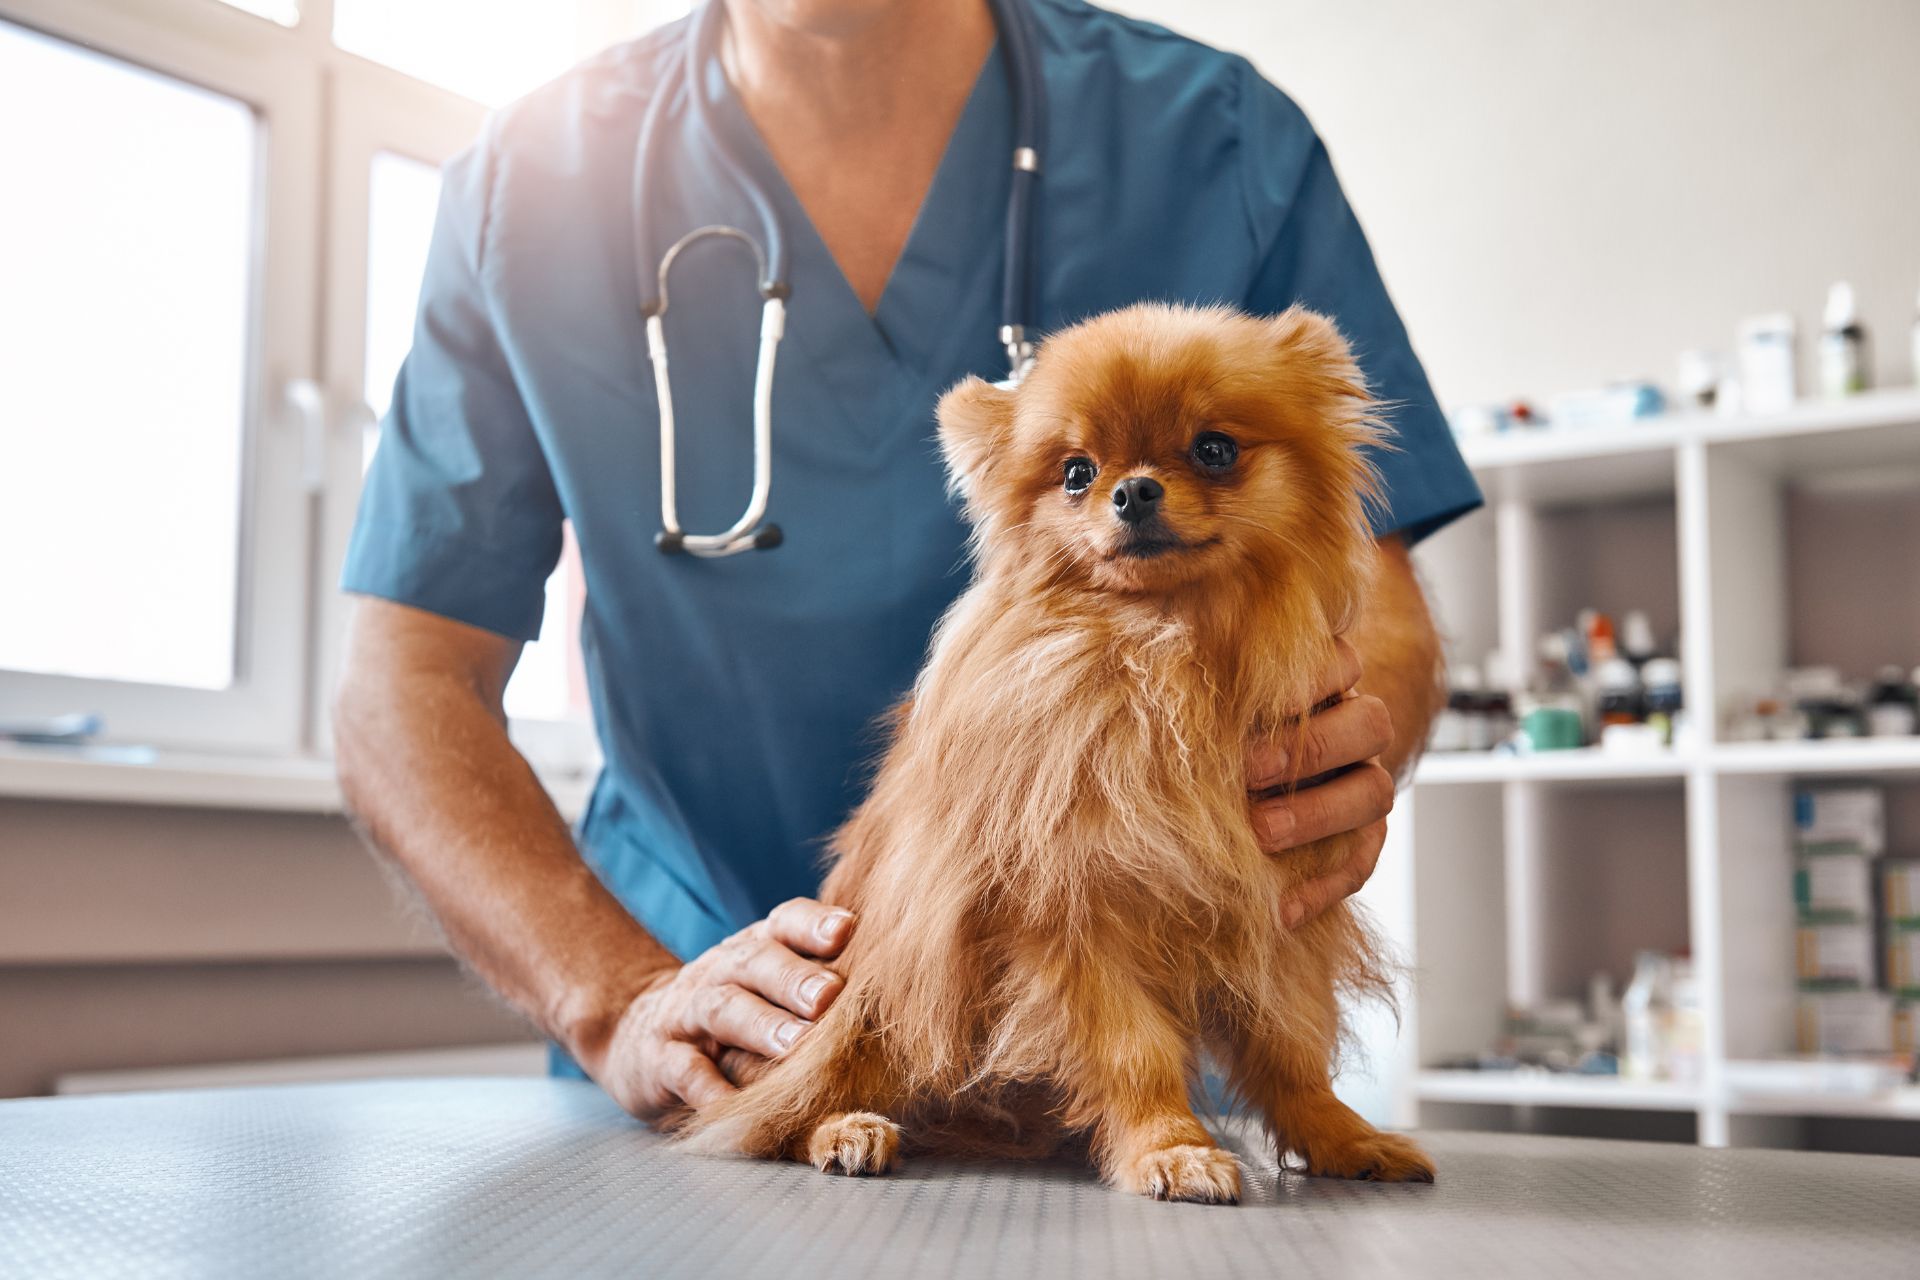 a person in a blue scrubs holding a small dog